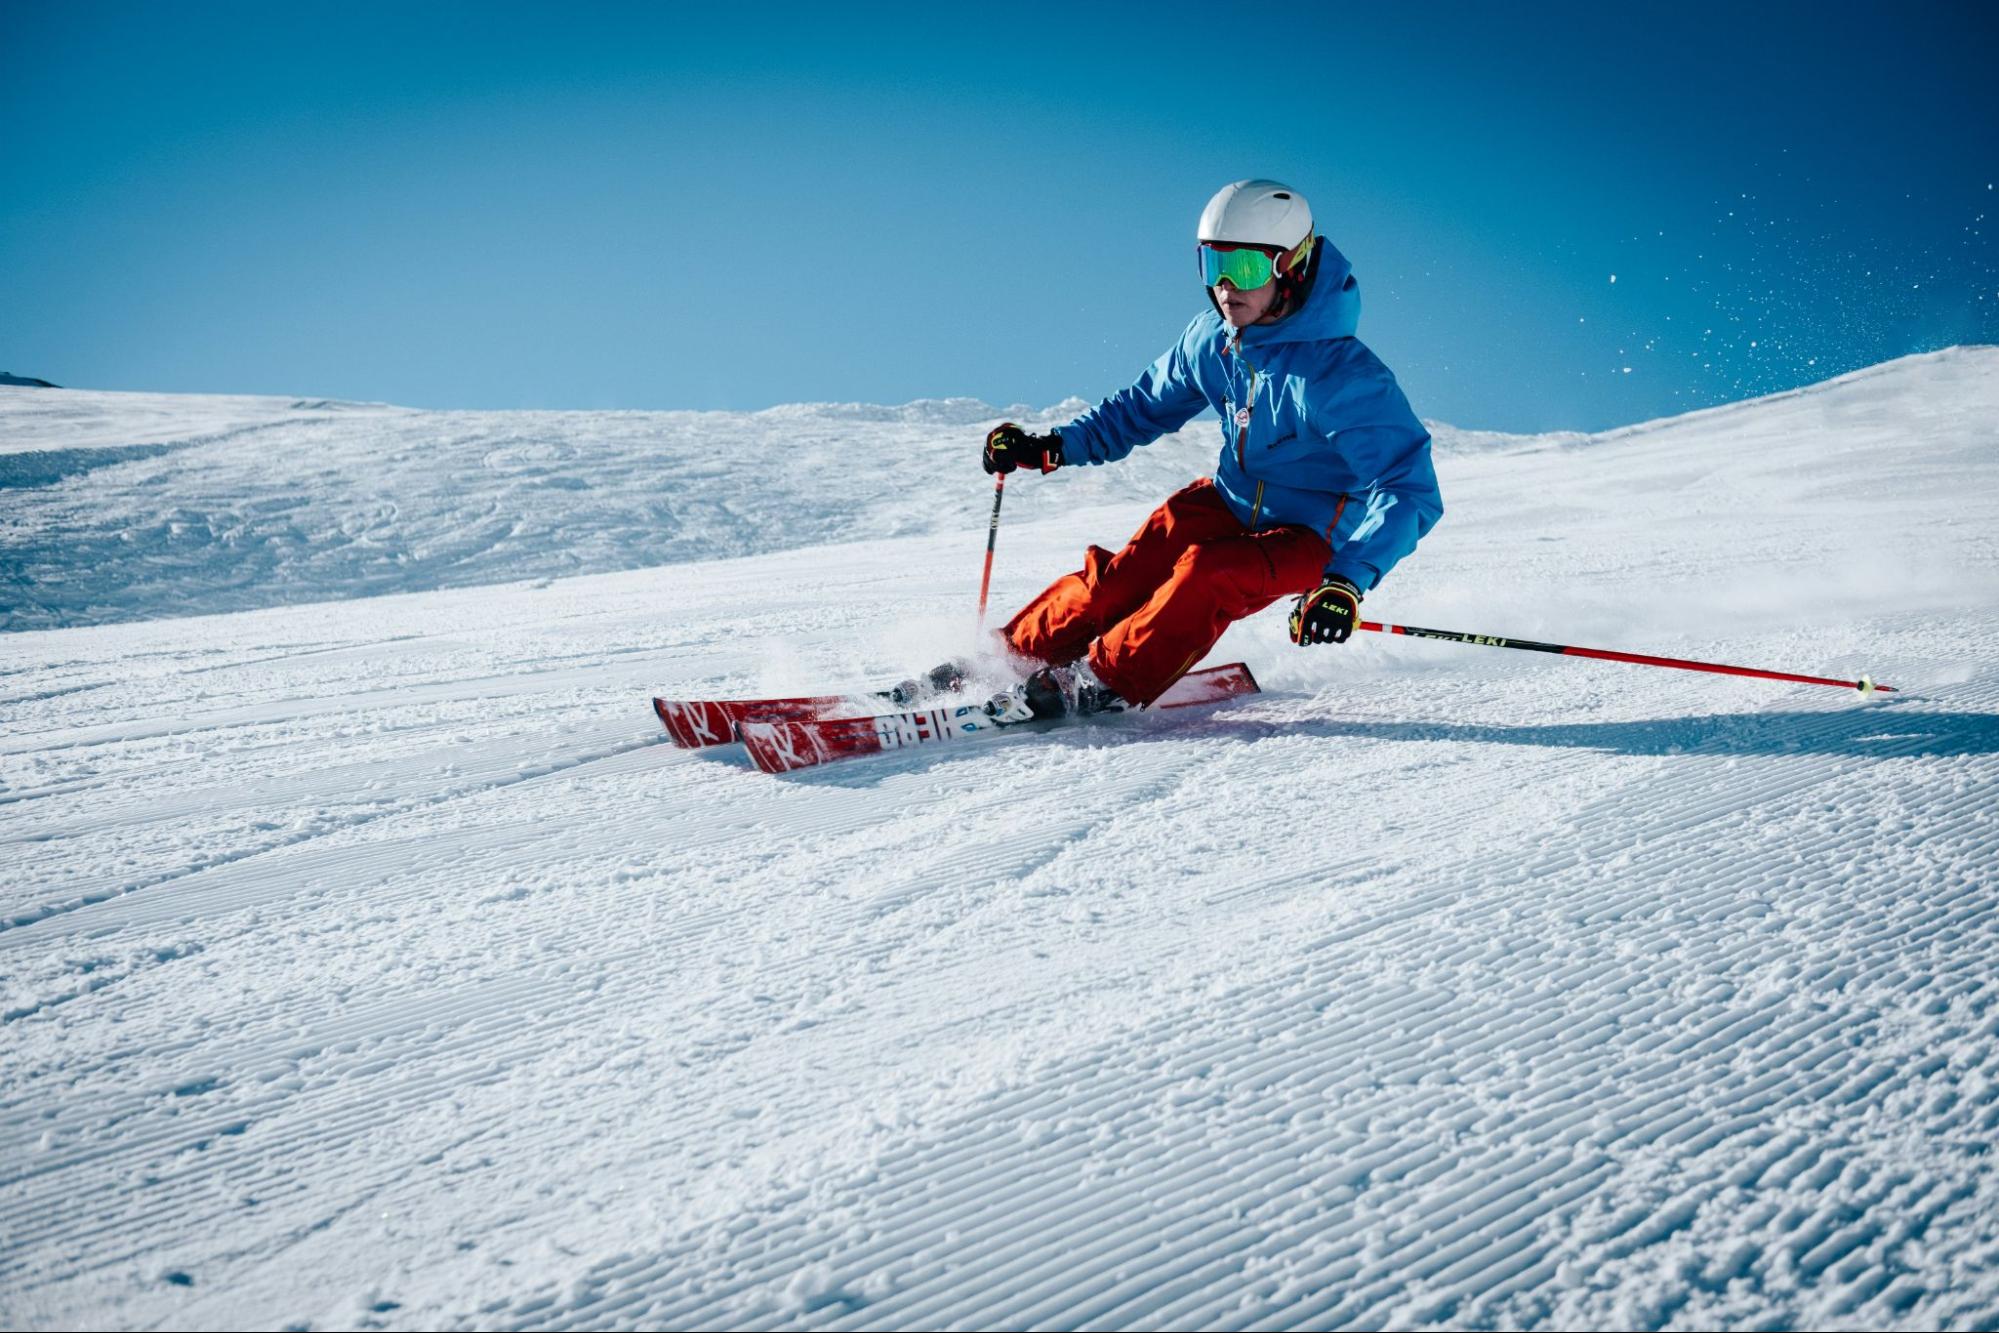 A person with skiing gear skiing down a mountain slope